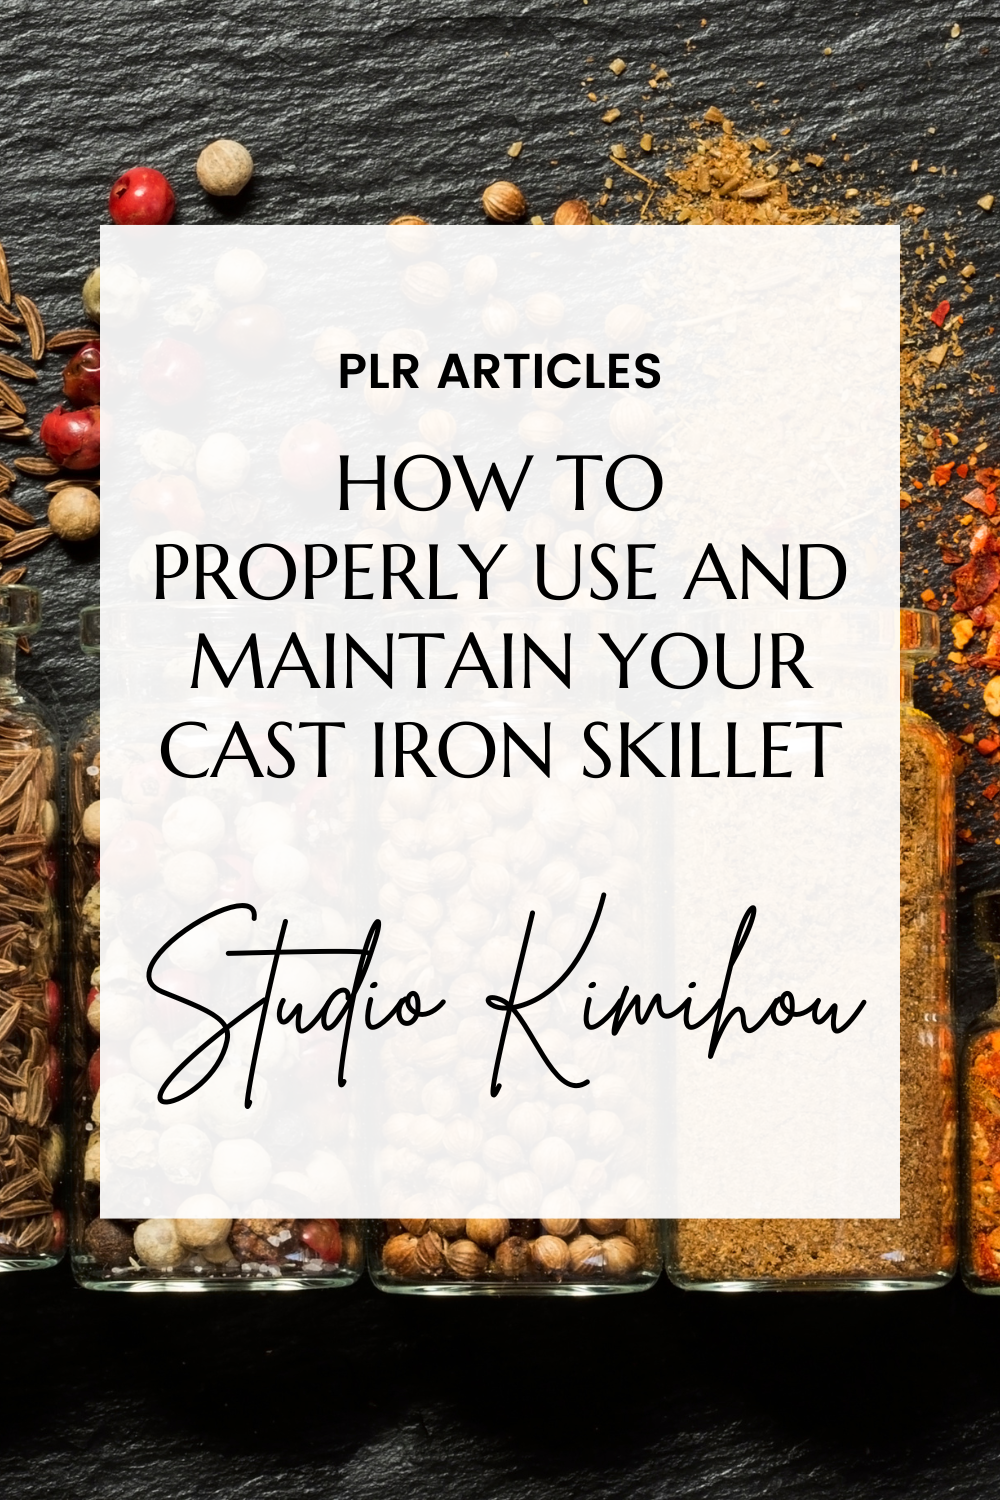 Article: How to Properly Use and Maintain Your Cast Iron Skillet